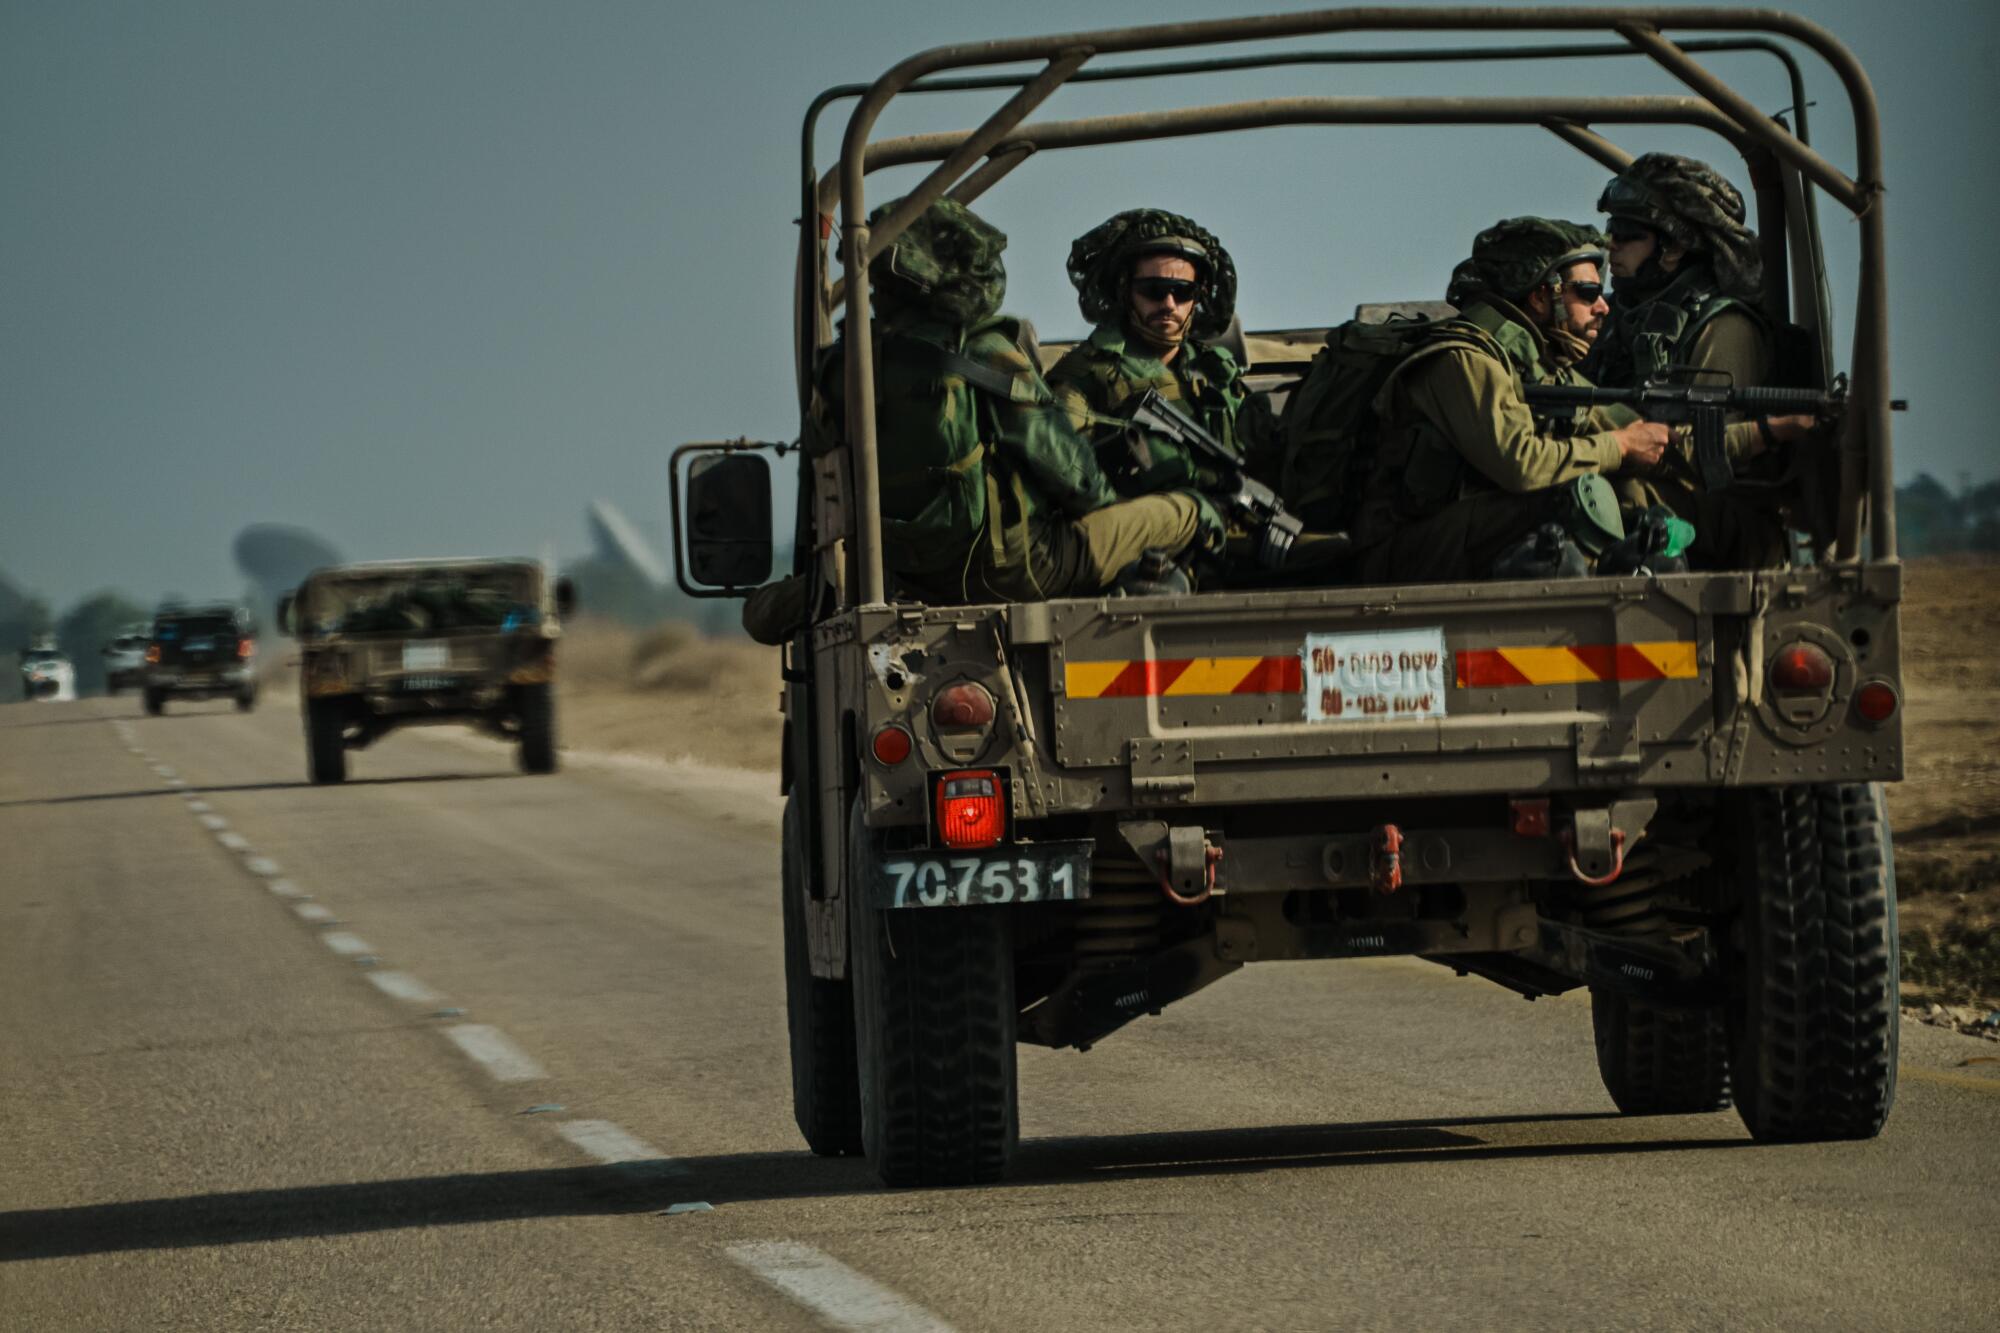 Israeli soldiers ride on a transport vehicle near Re'im, Israel on Tuesday.